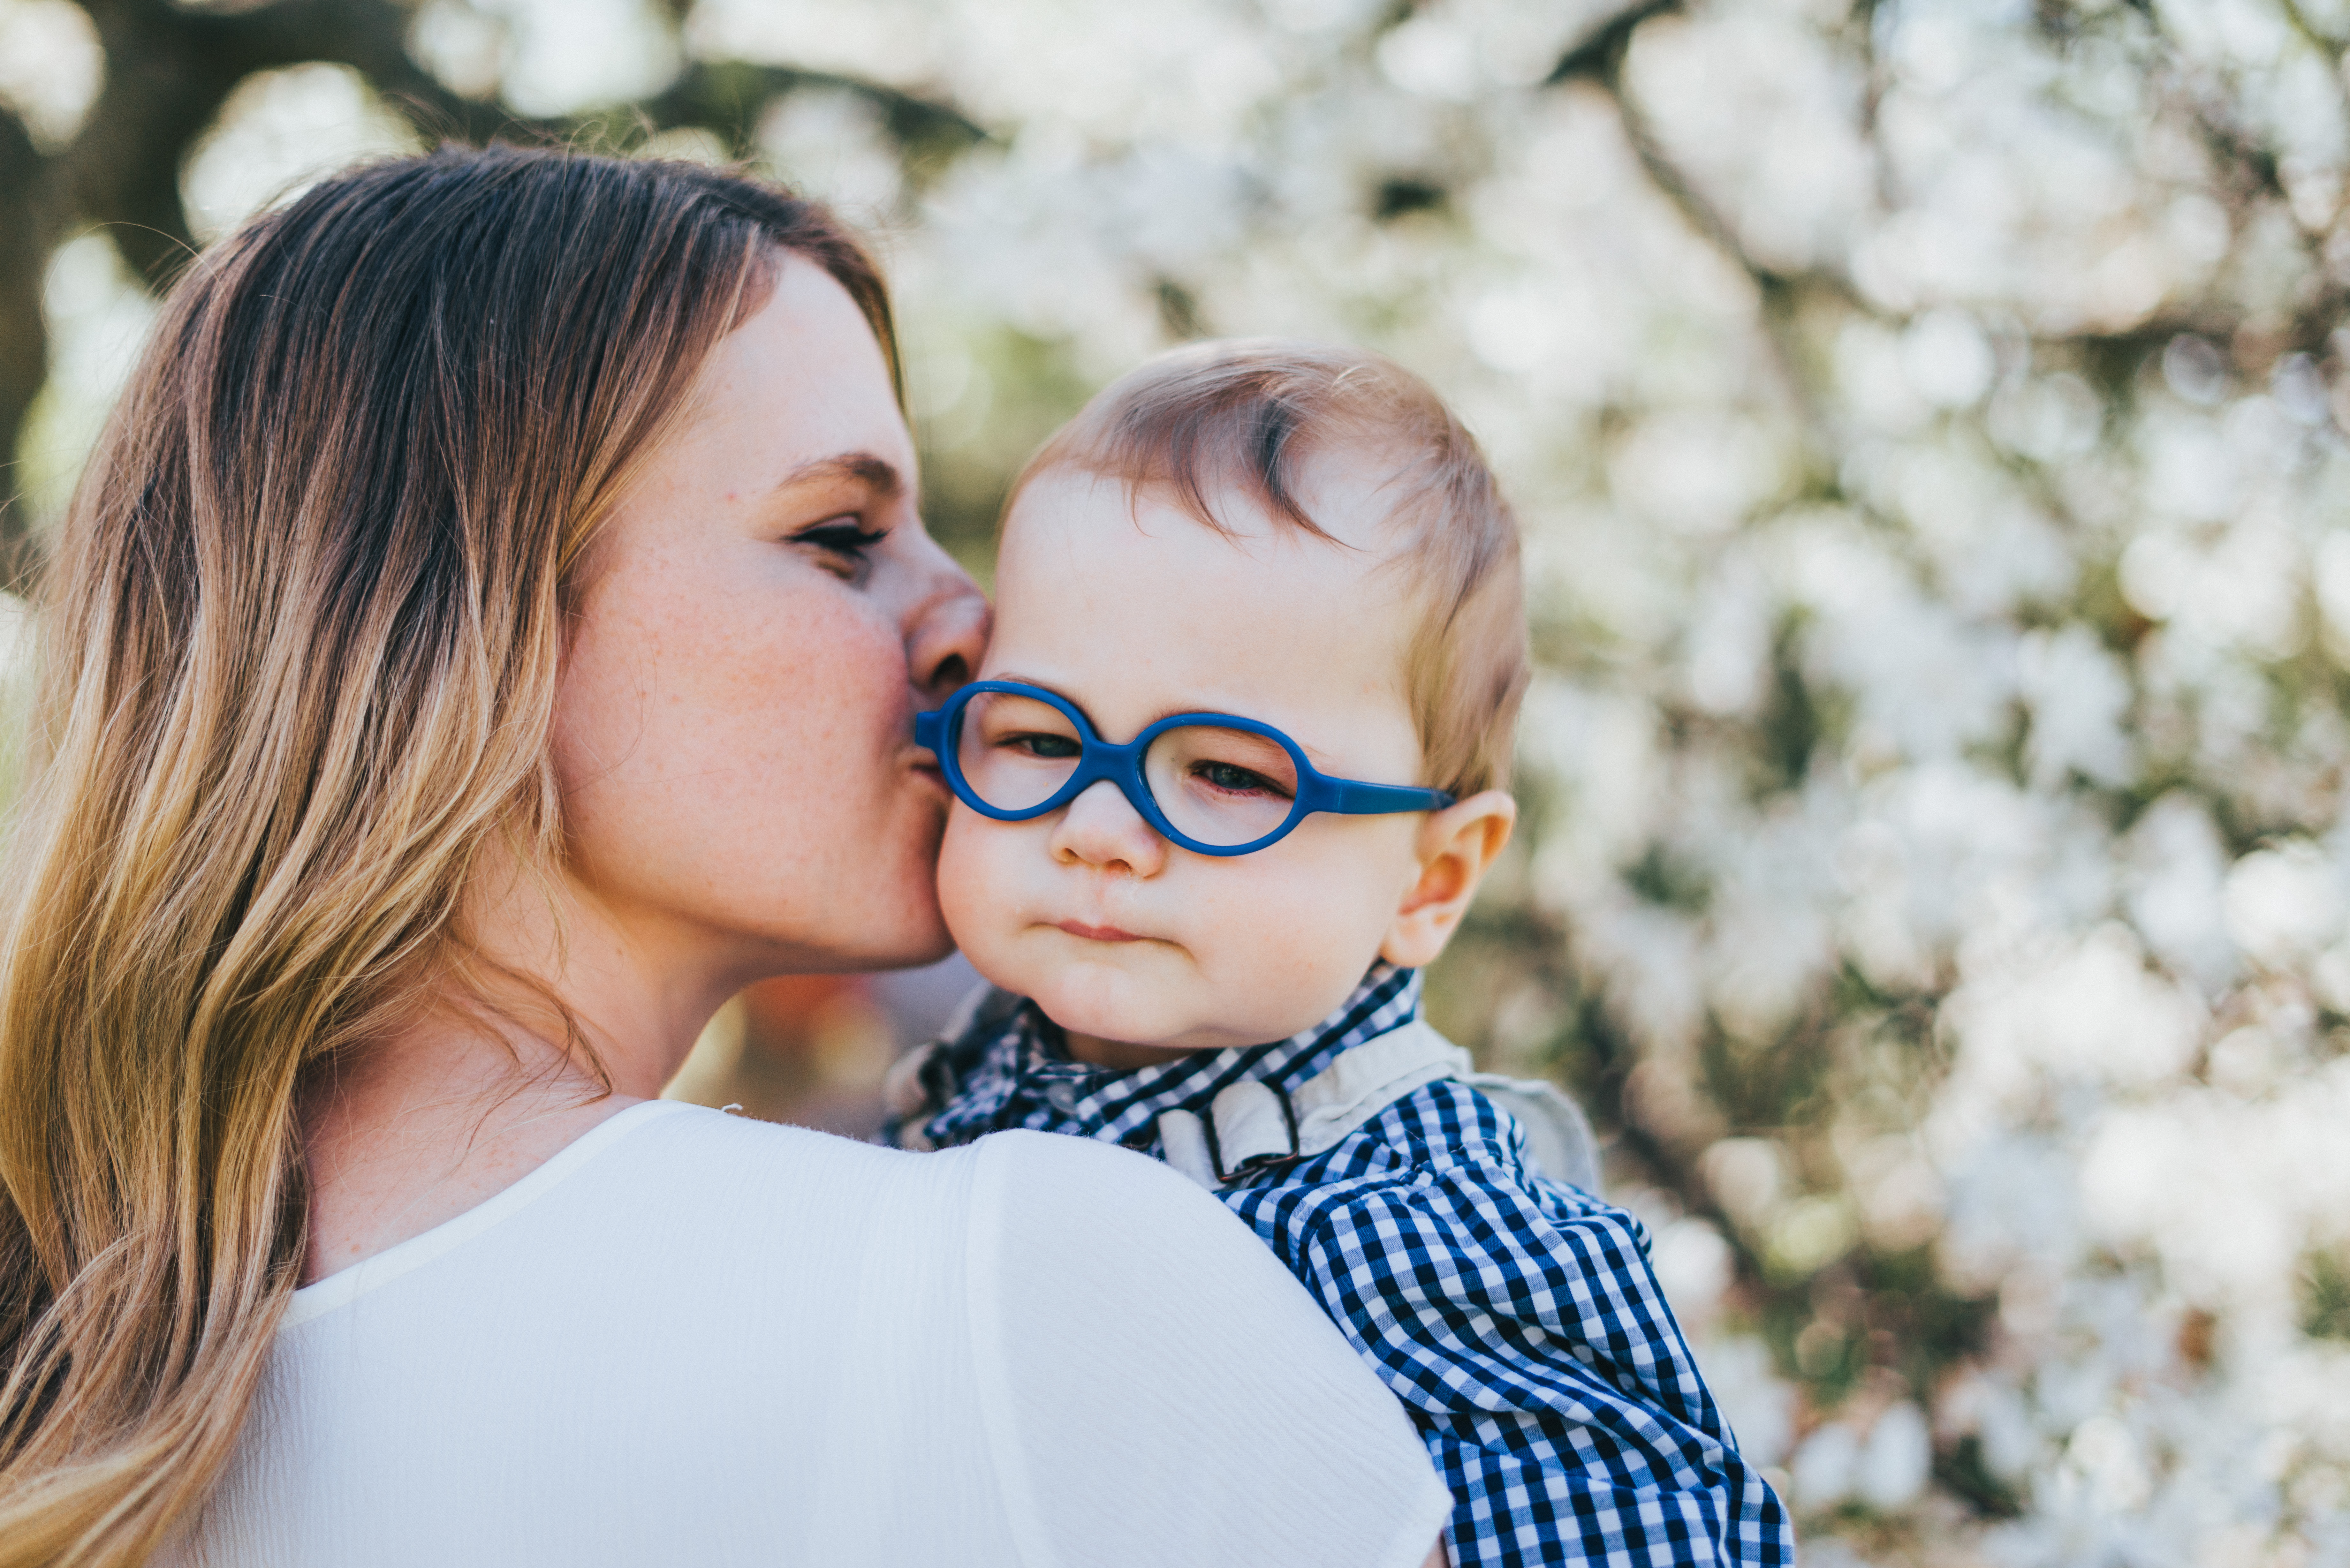 Author kissing her infant son with vision impairment on the cheek. She is in a white dress with curled hair and he is wearing dark blue baby glasses in a matching blue gingham dress shirt.